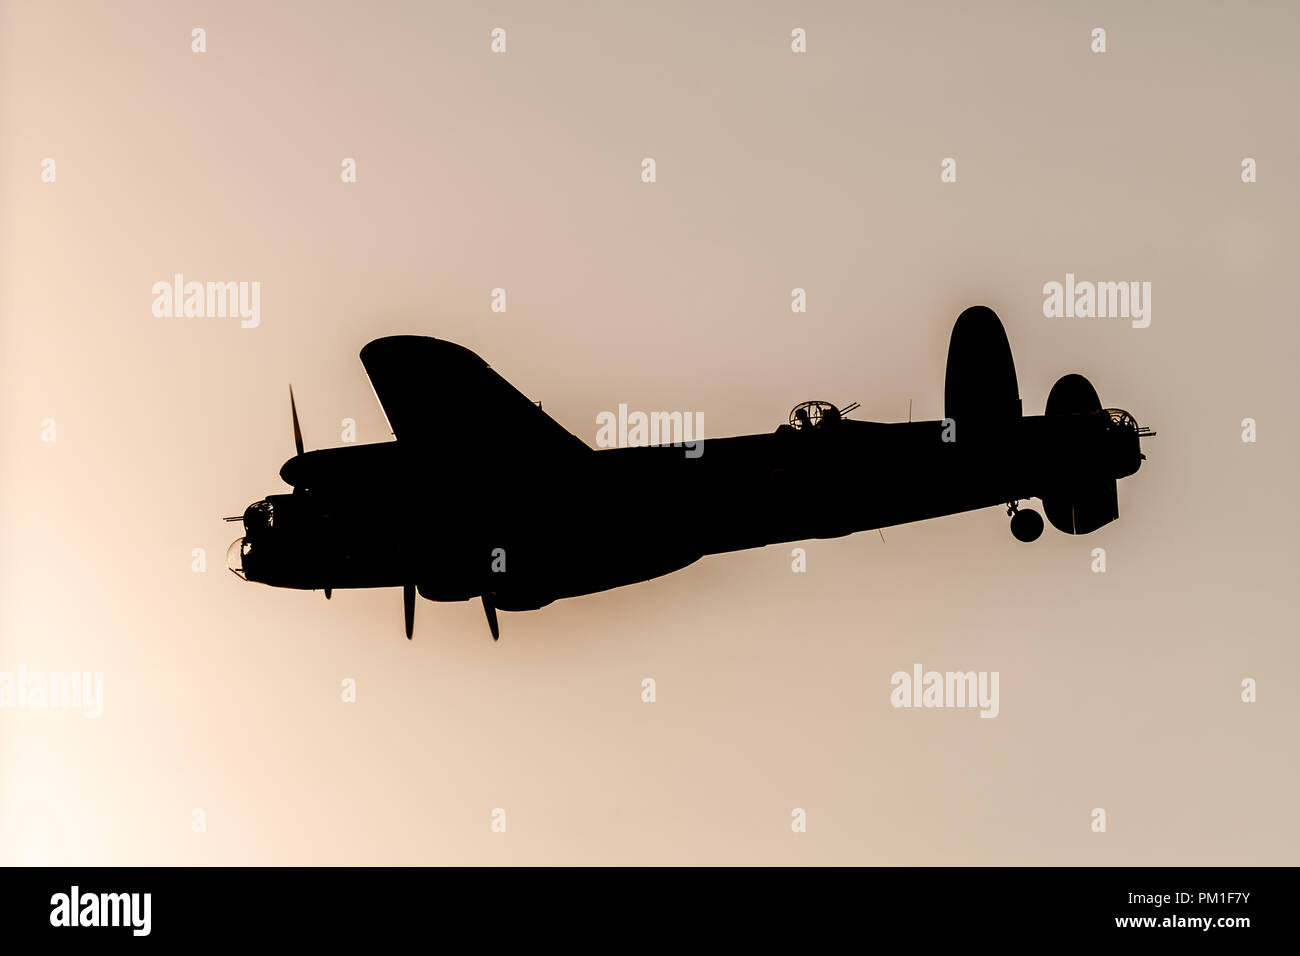 SOUTHPORT, UK JULY 8 2018:  A photograph documenting the silhouette of the Avro Lancaster Bomber from the Battle of Britain Memorial Flight as it perf Stock Photo